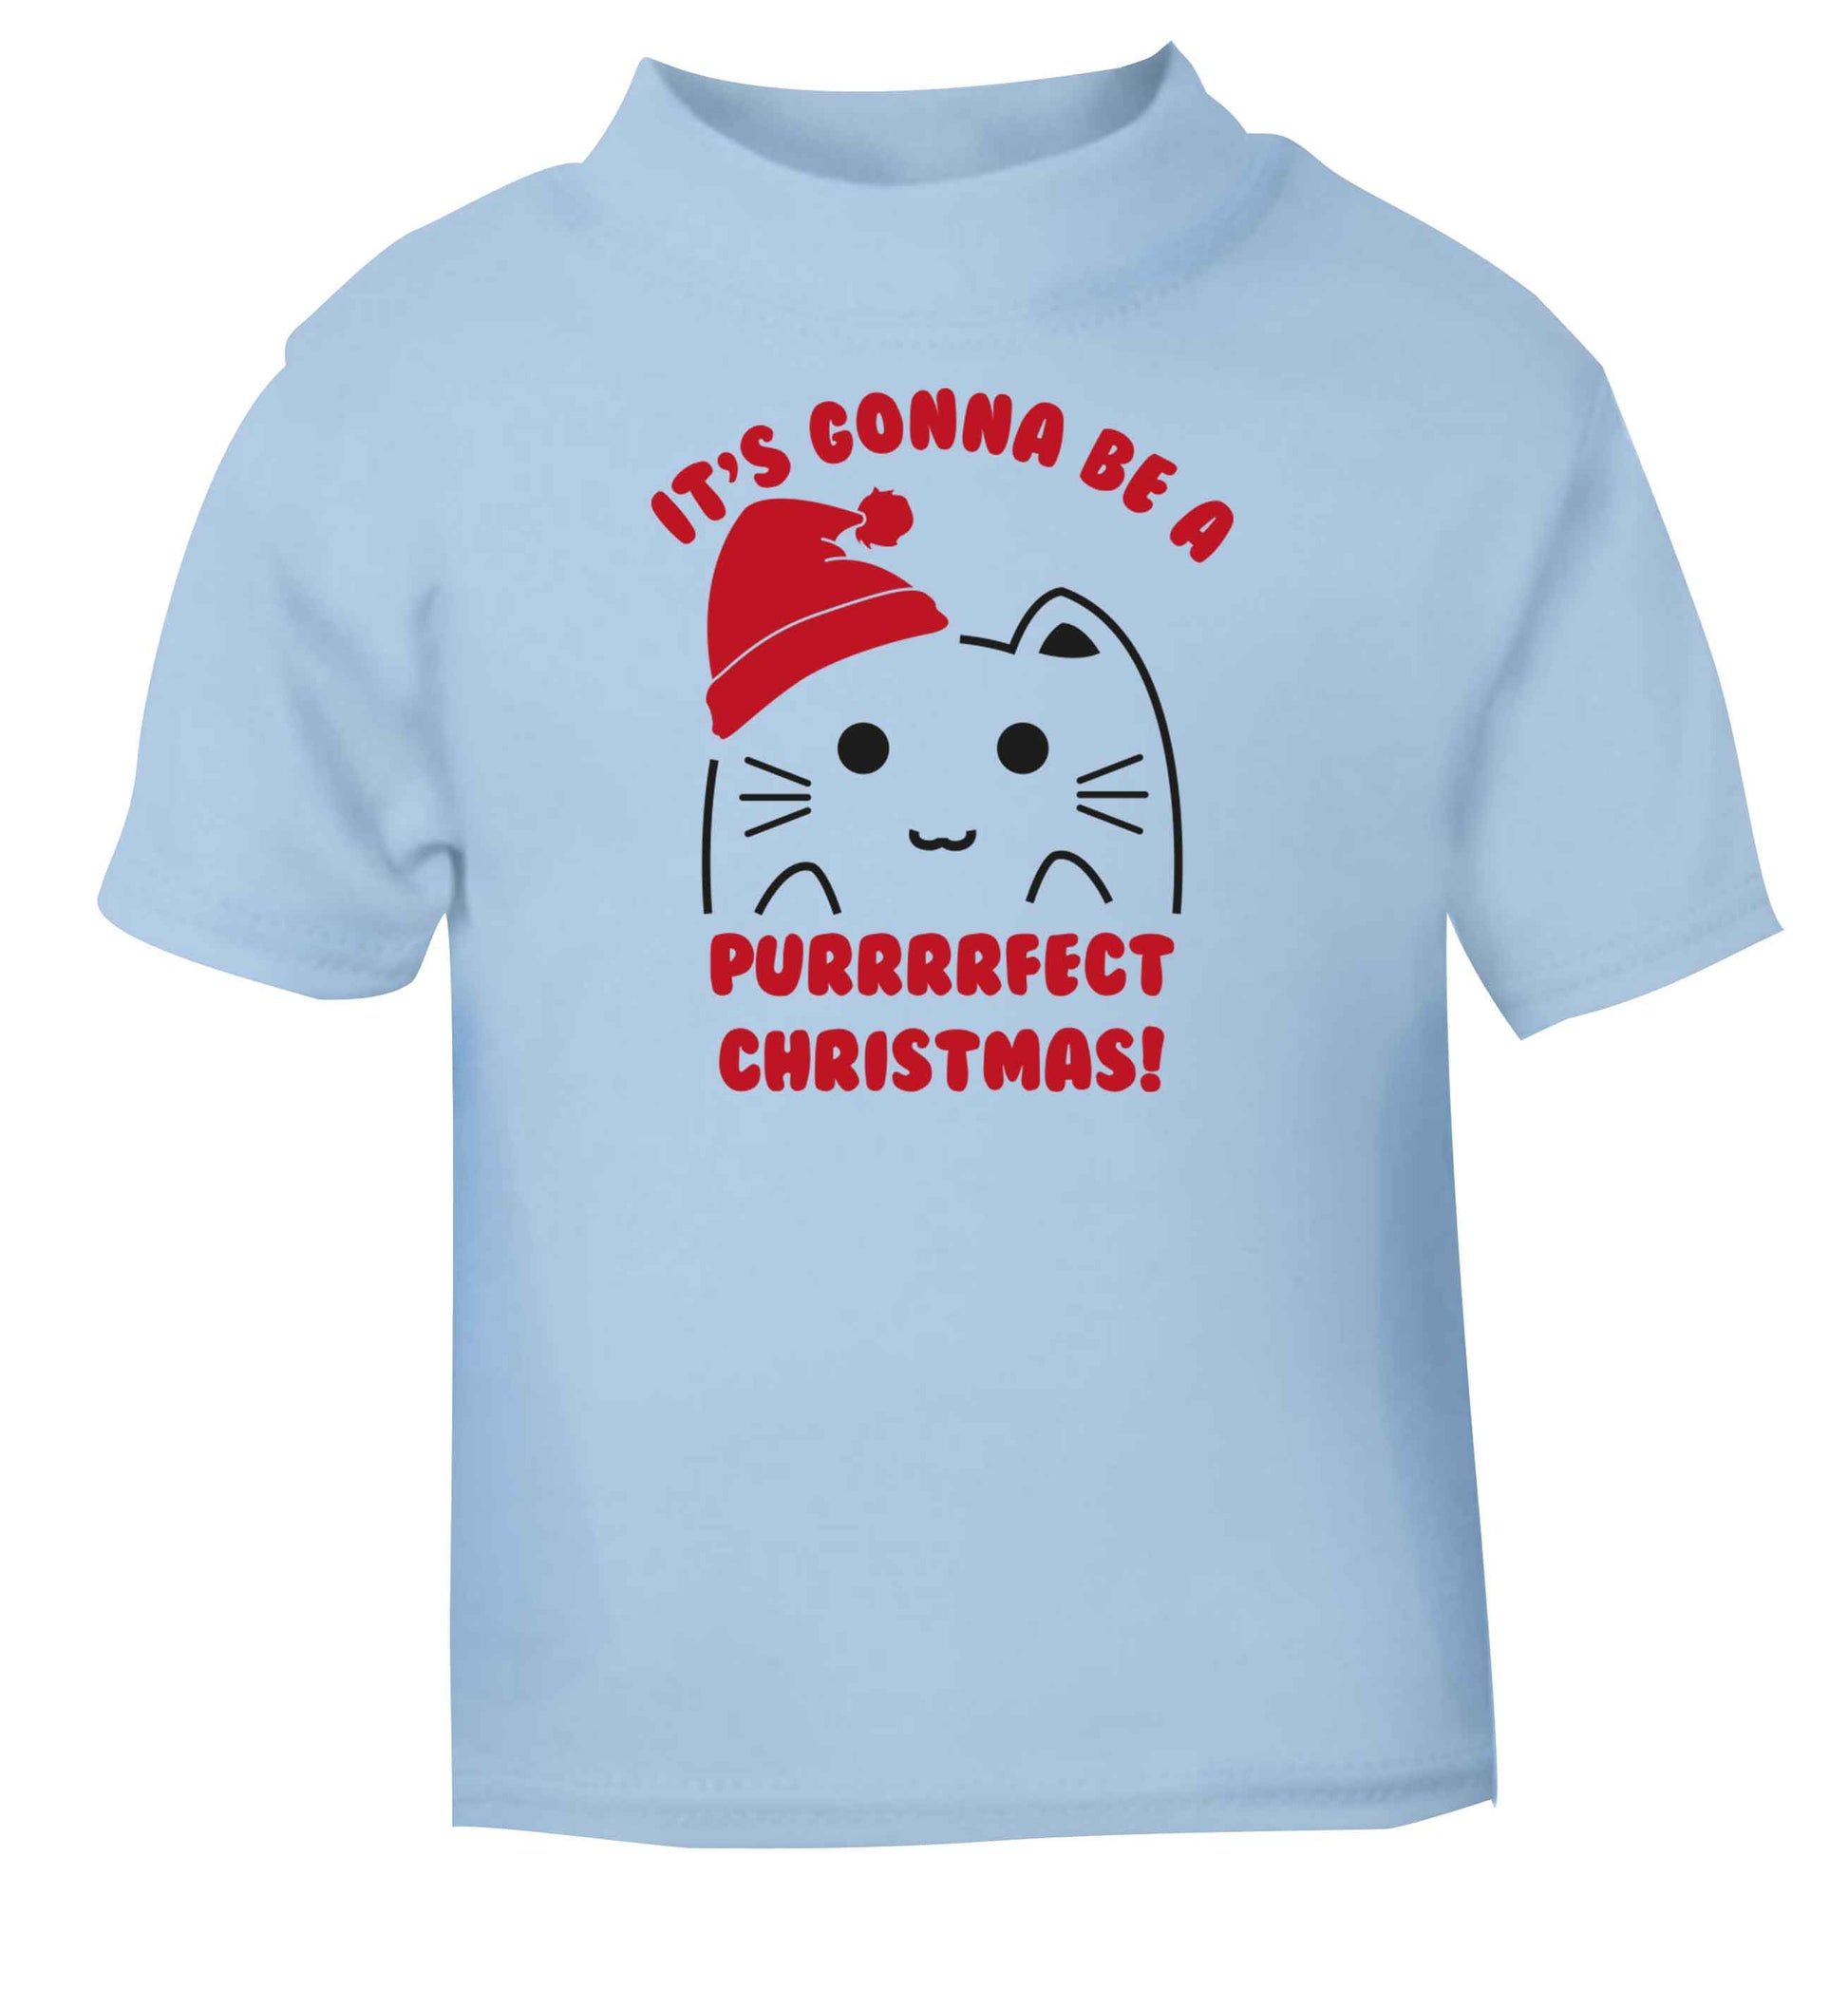 It's going to be a purrfect Christmas light blue baby toddler Tshirt 2 Years